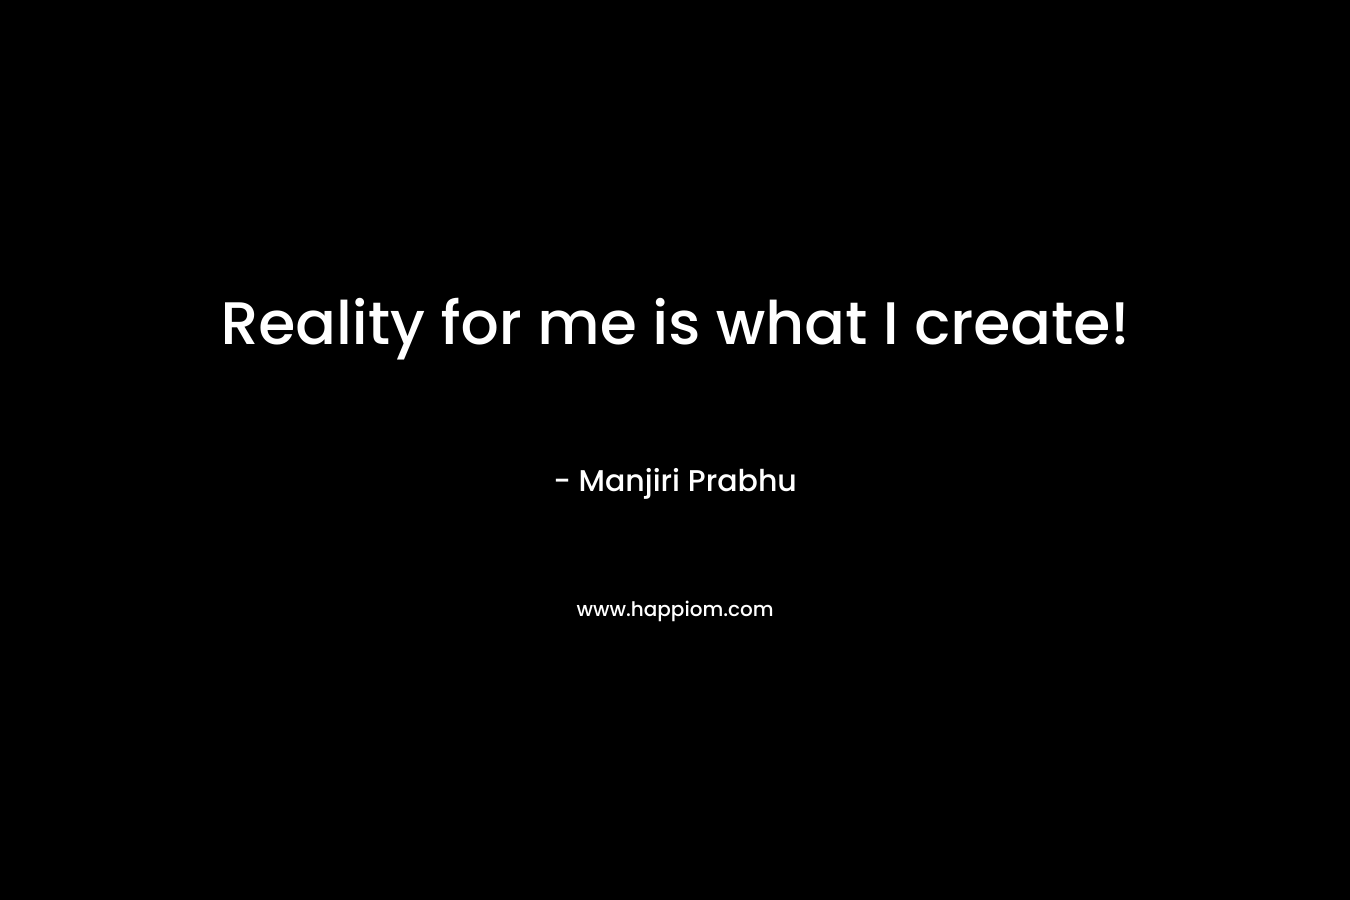 Reality for me is what I create!